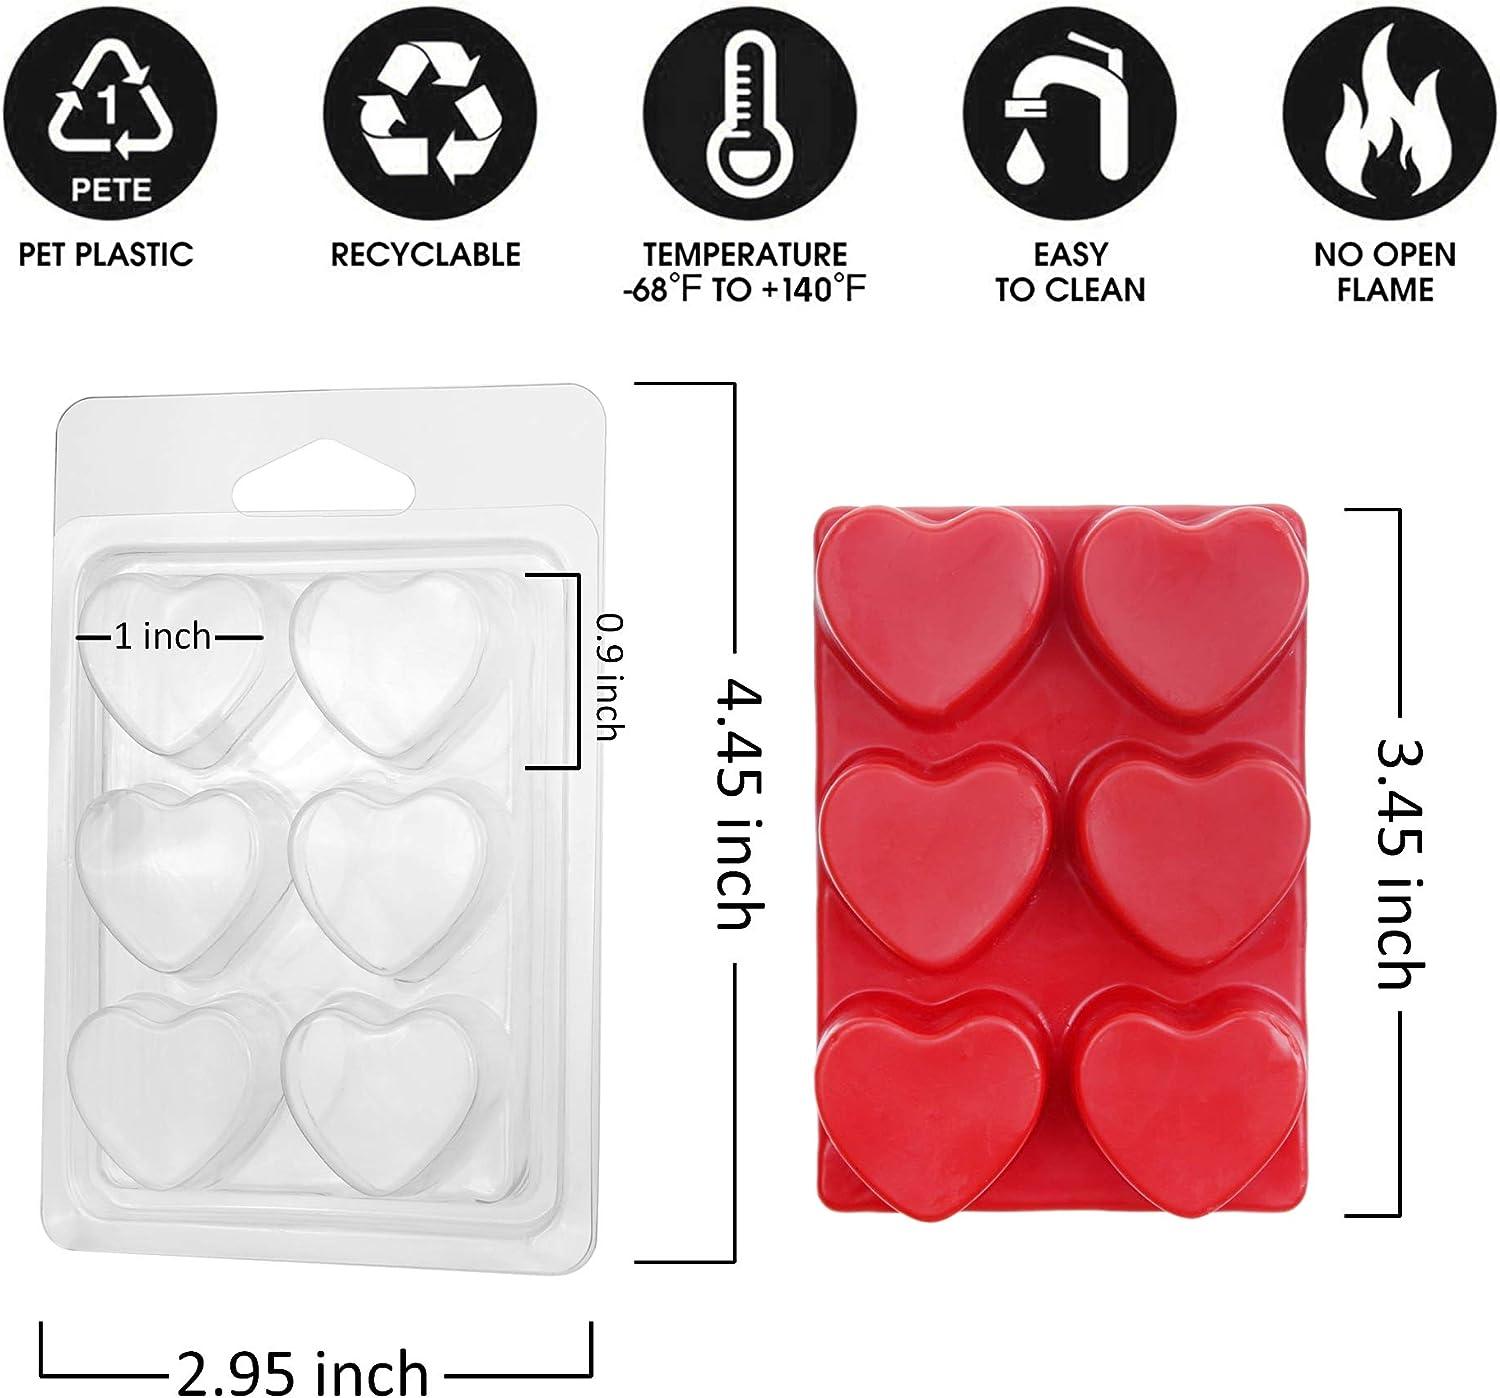  MILIVIXAY Wax Melt Containers-6 Cavity Clear Empty